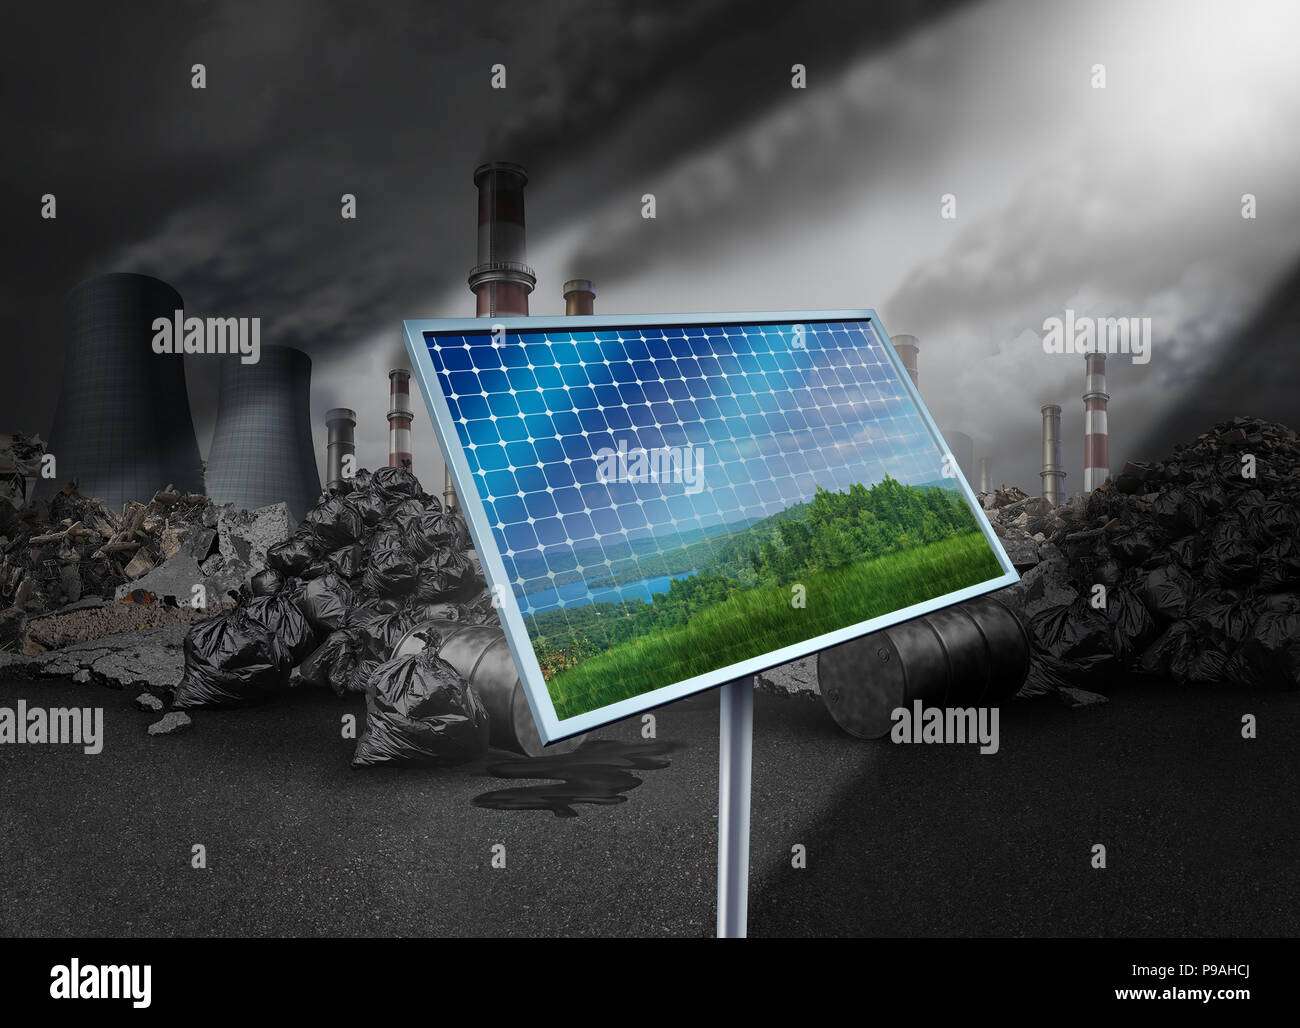 Solar panel cell reflecting gree nature as an alternative source of sun energy power grid against a polluted toxic background as a sunlight fuel as a  Stock Photo